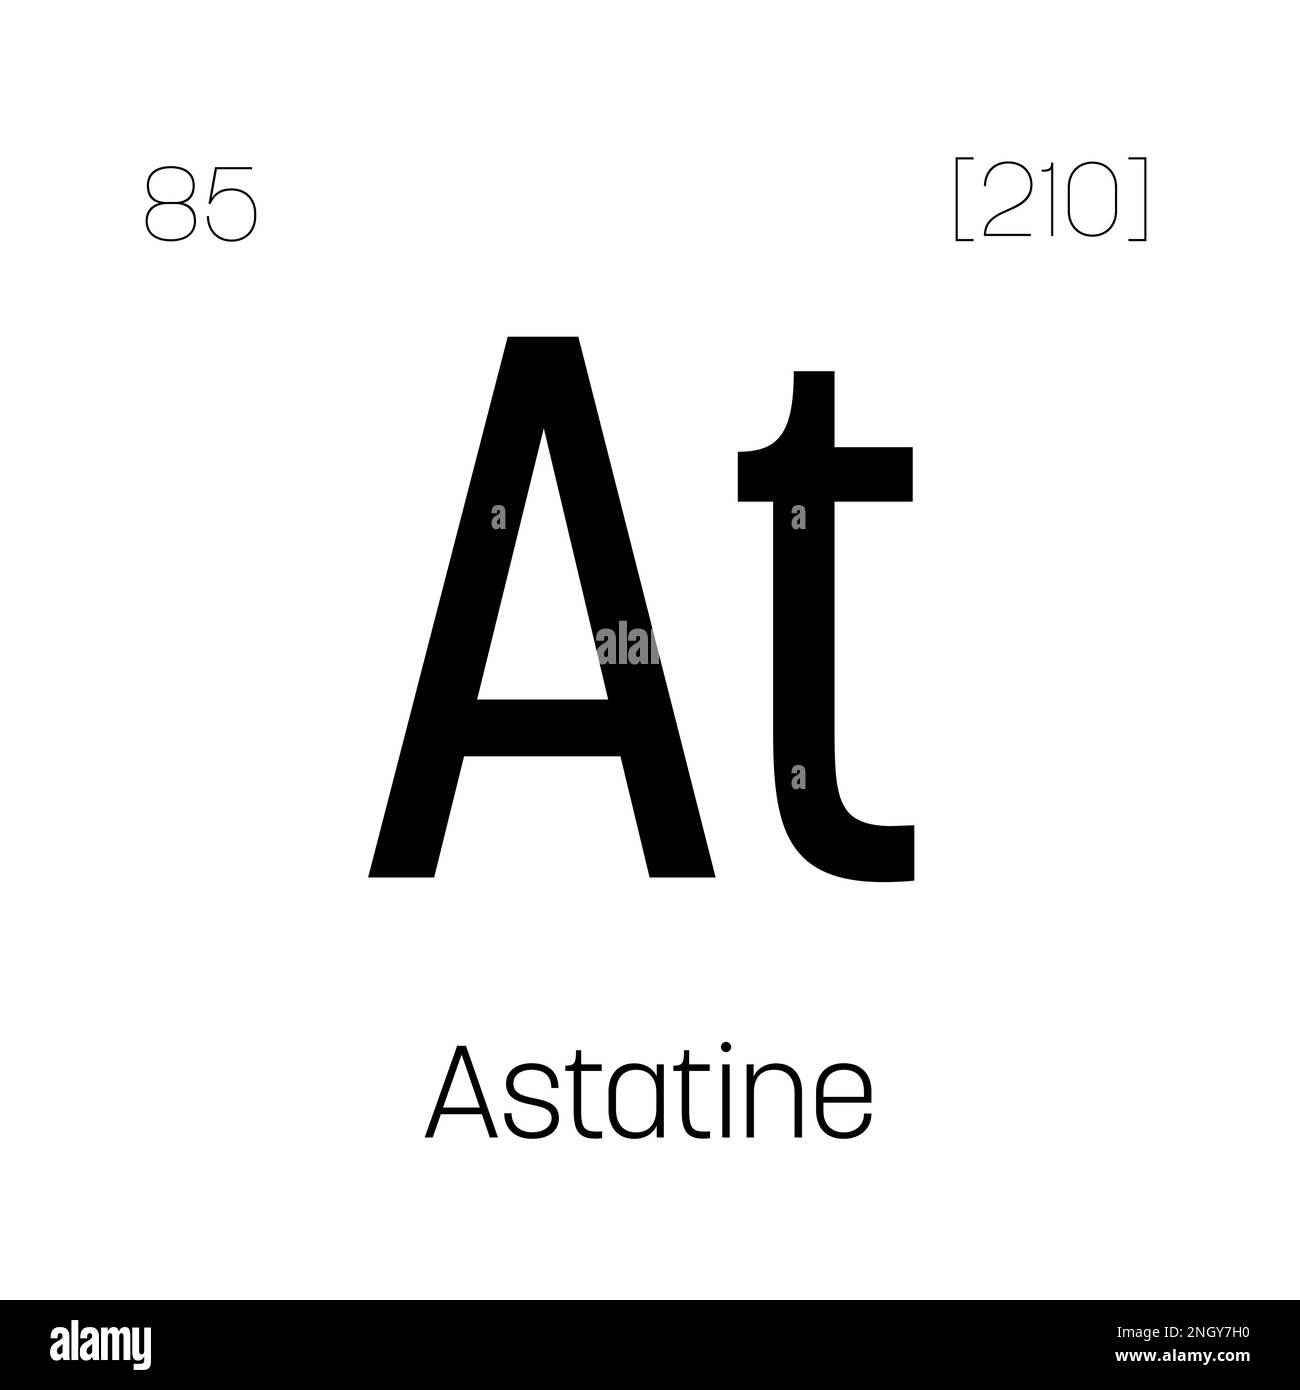 Astatine, At, periodic table element with name, symbol, atomic number and weight. Radioactive halogen with potential uses in cancer treatment and as a source of alpha particles for scientific research. Stock Vector